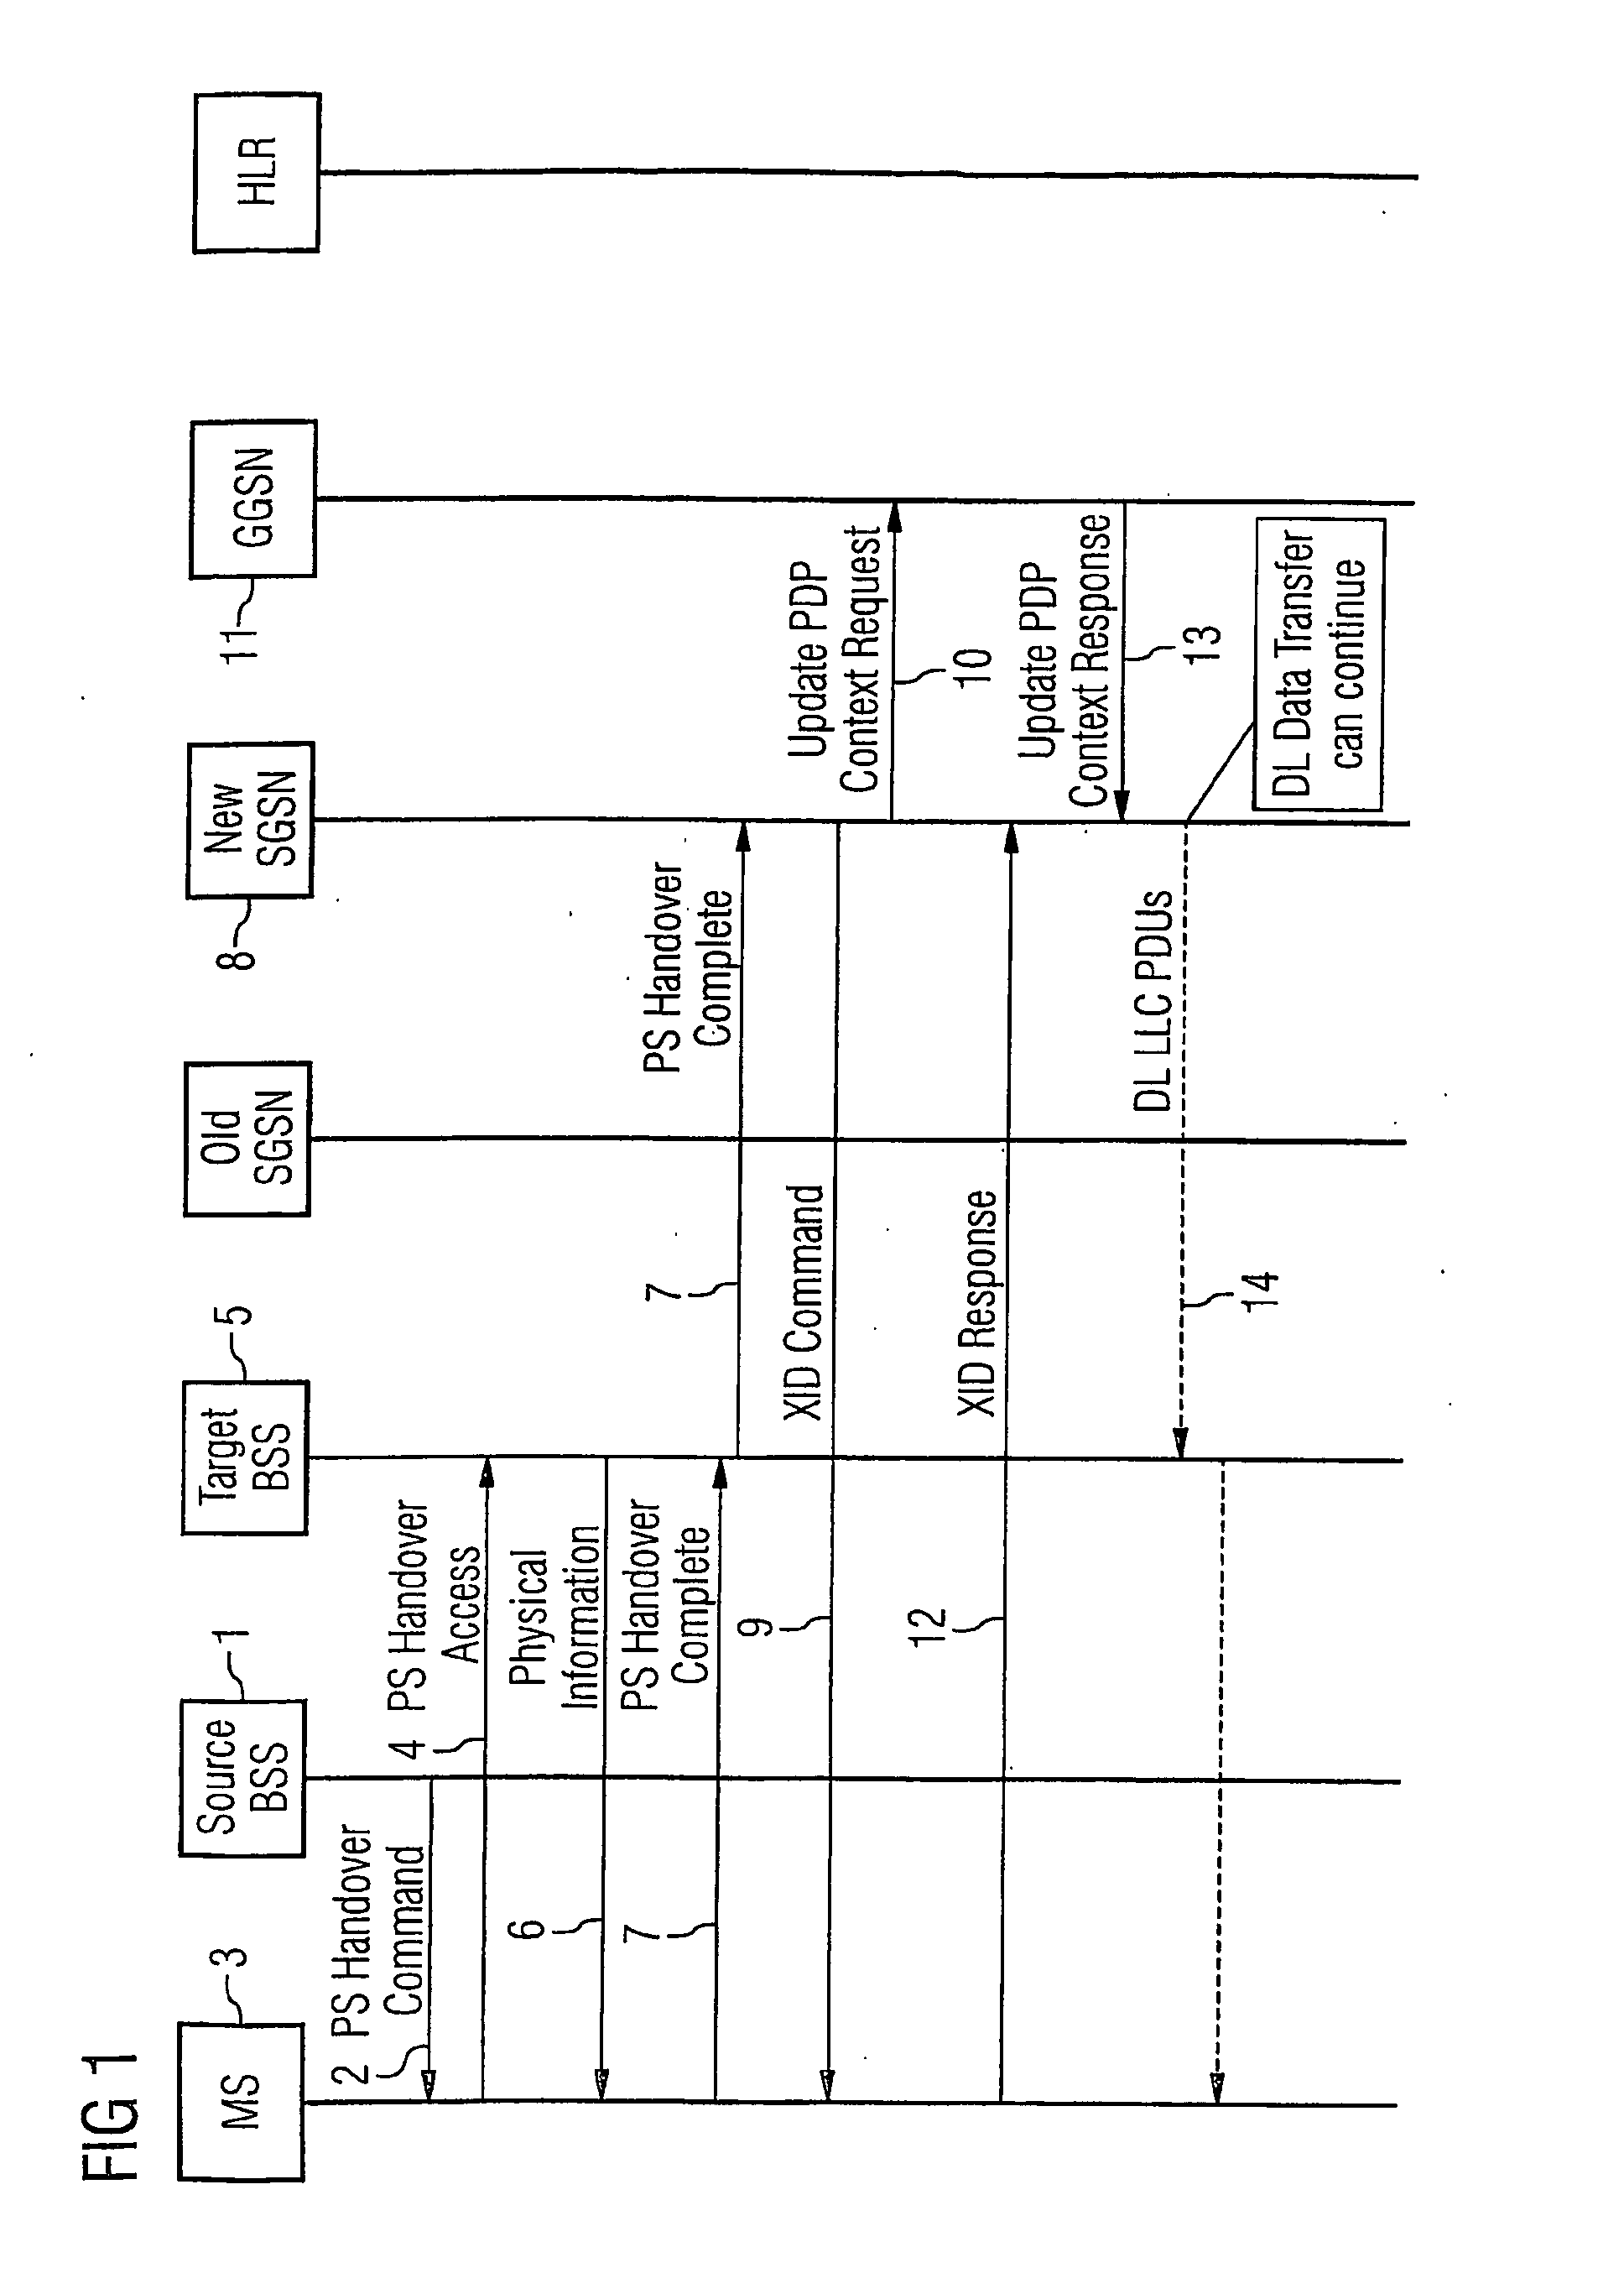 Method of Packet Switched Handover